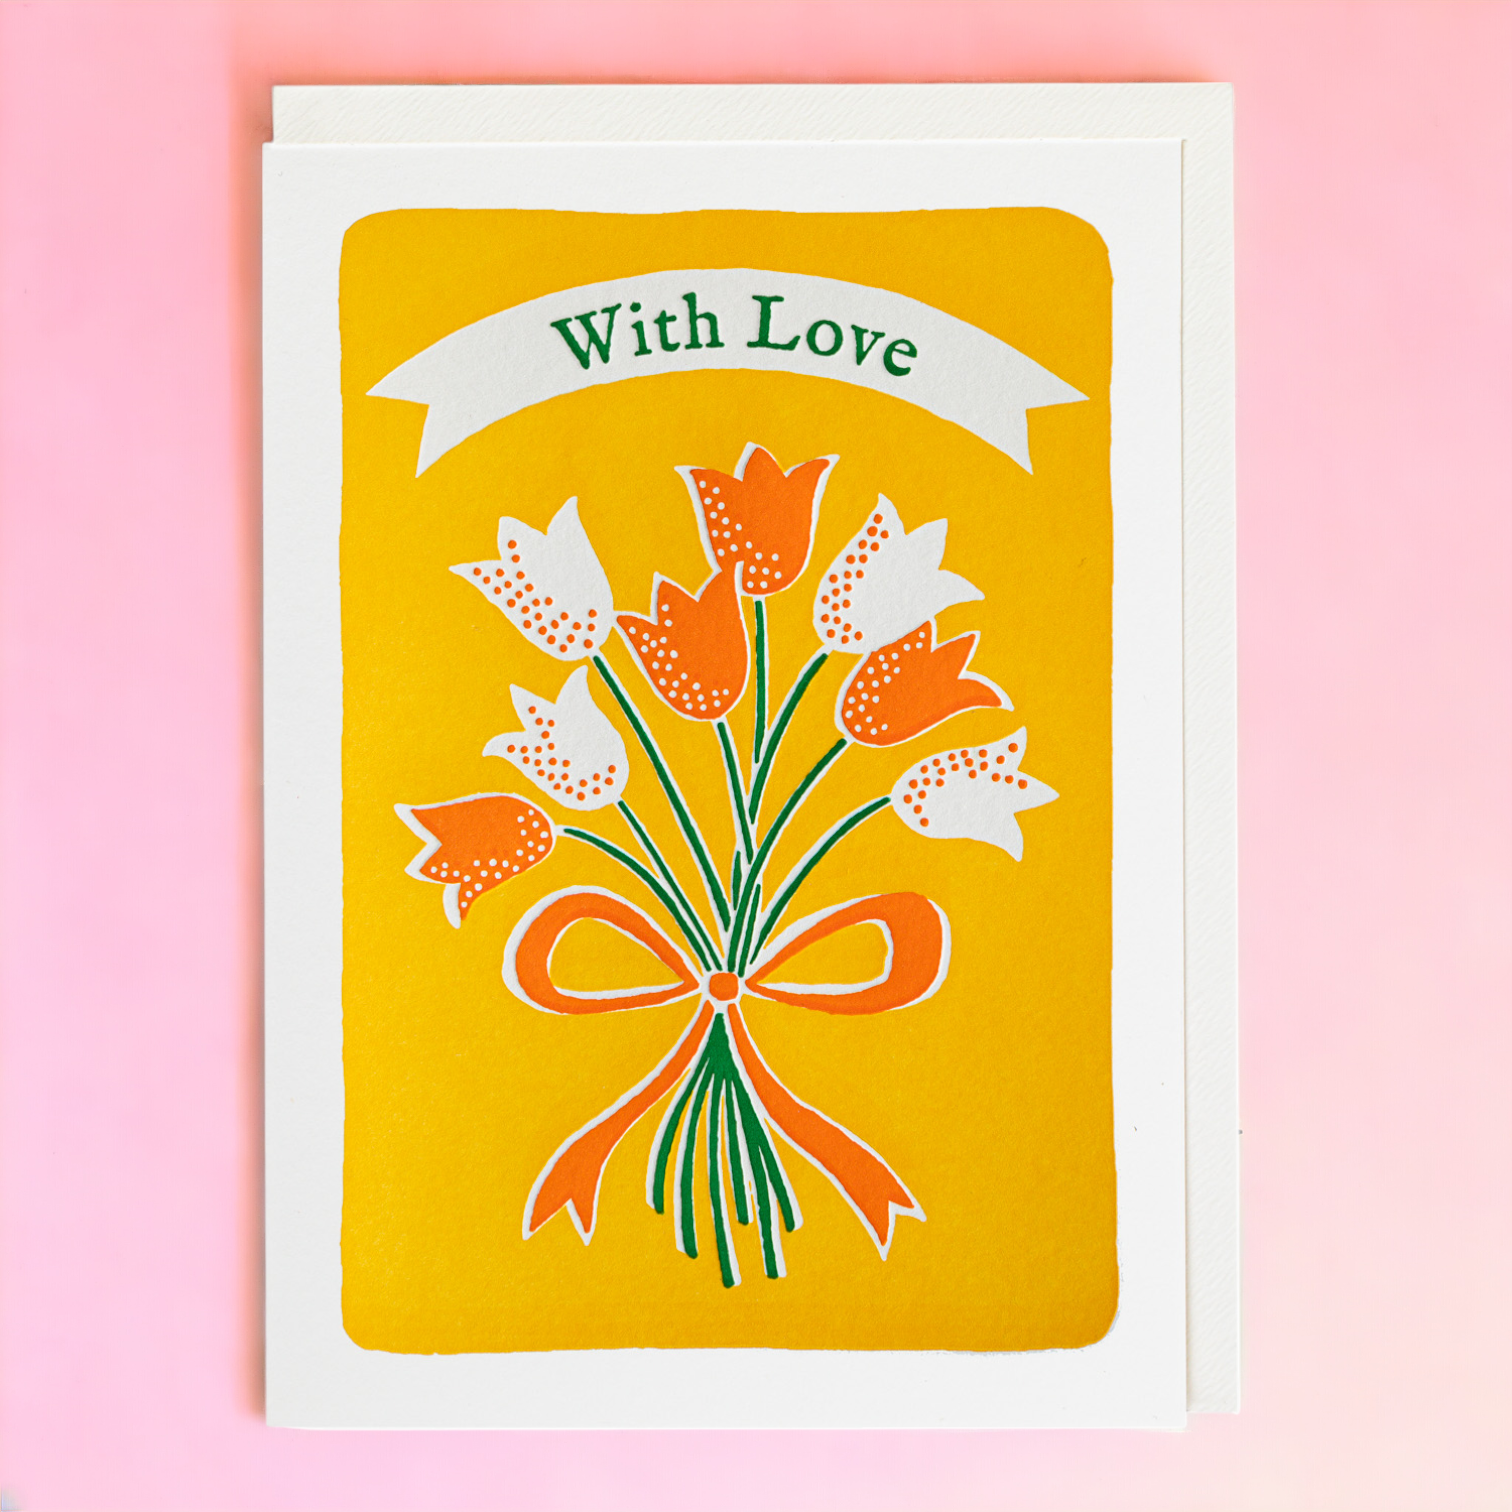 Tulips With Love - letterpress printed greeting card